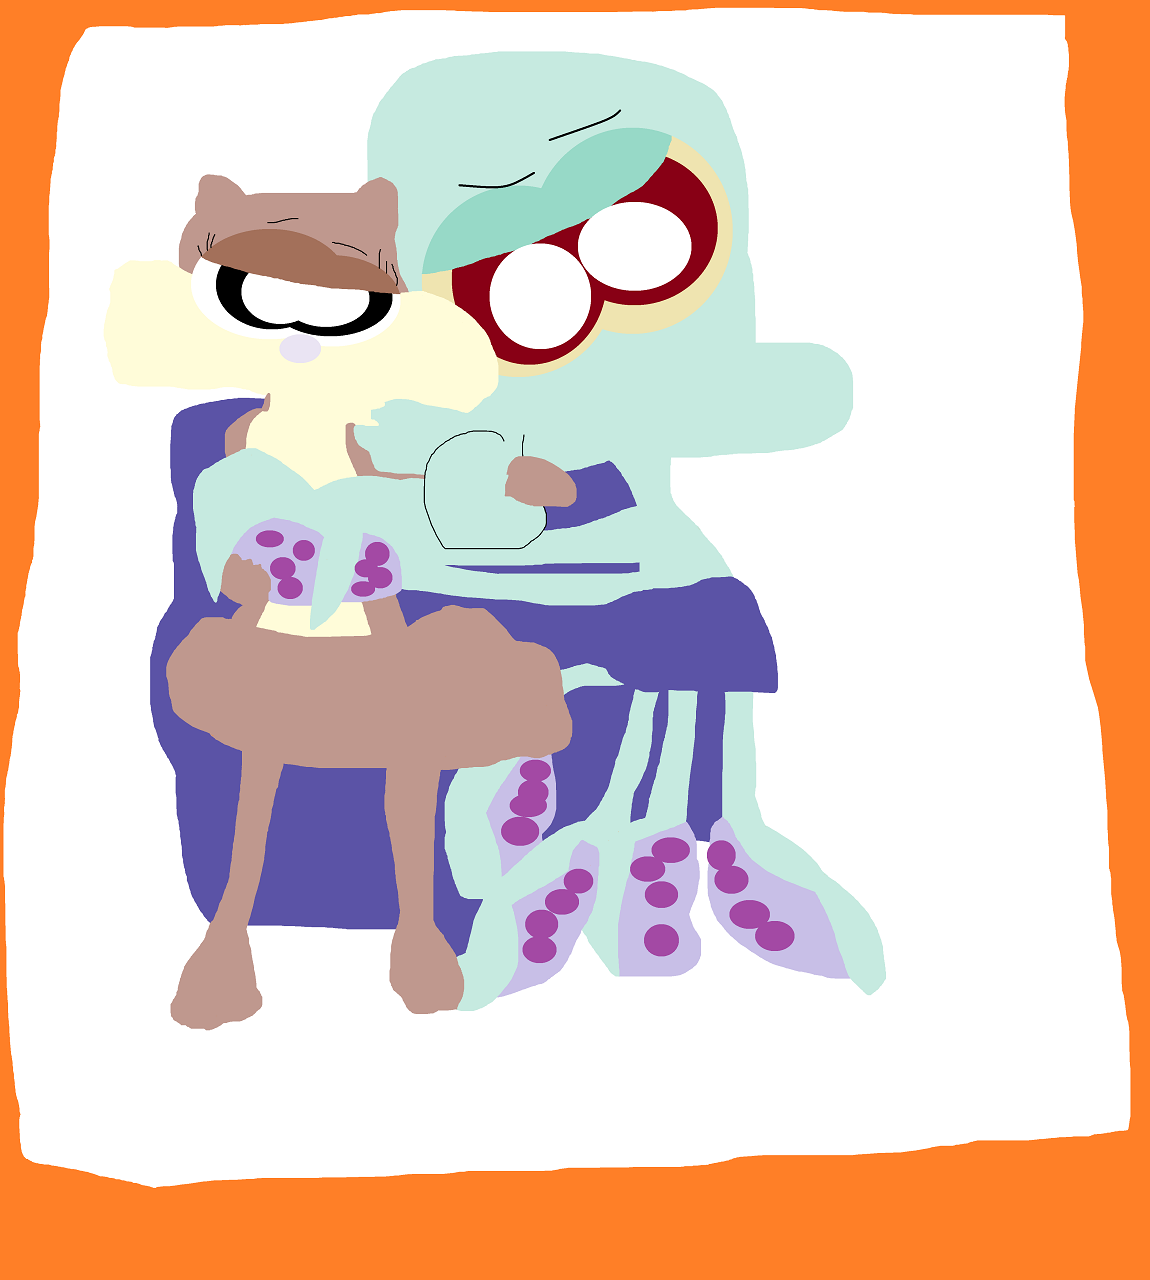 Random Squidward And Sandy Kissing In Bed by Falconlobo